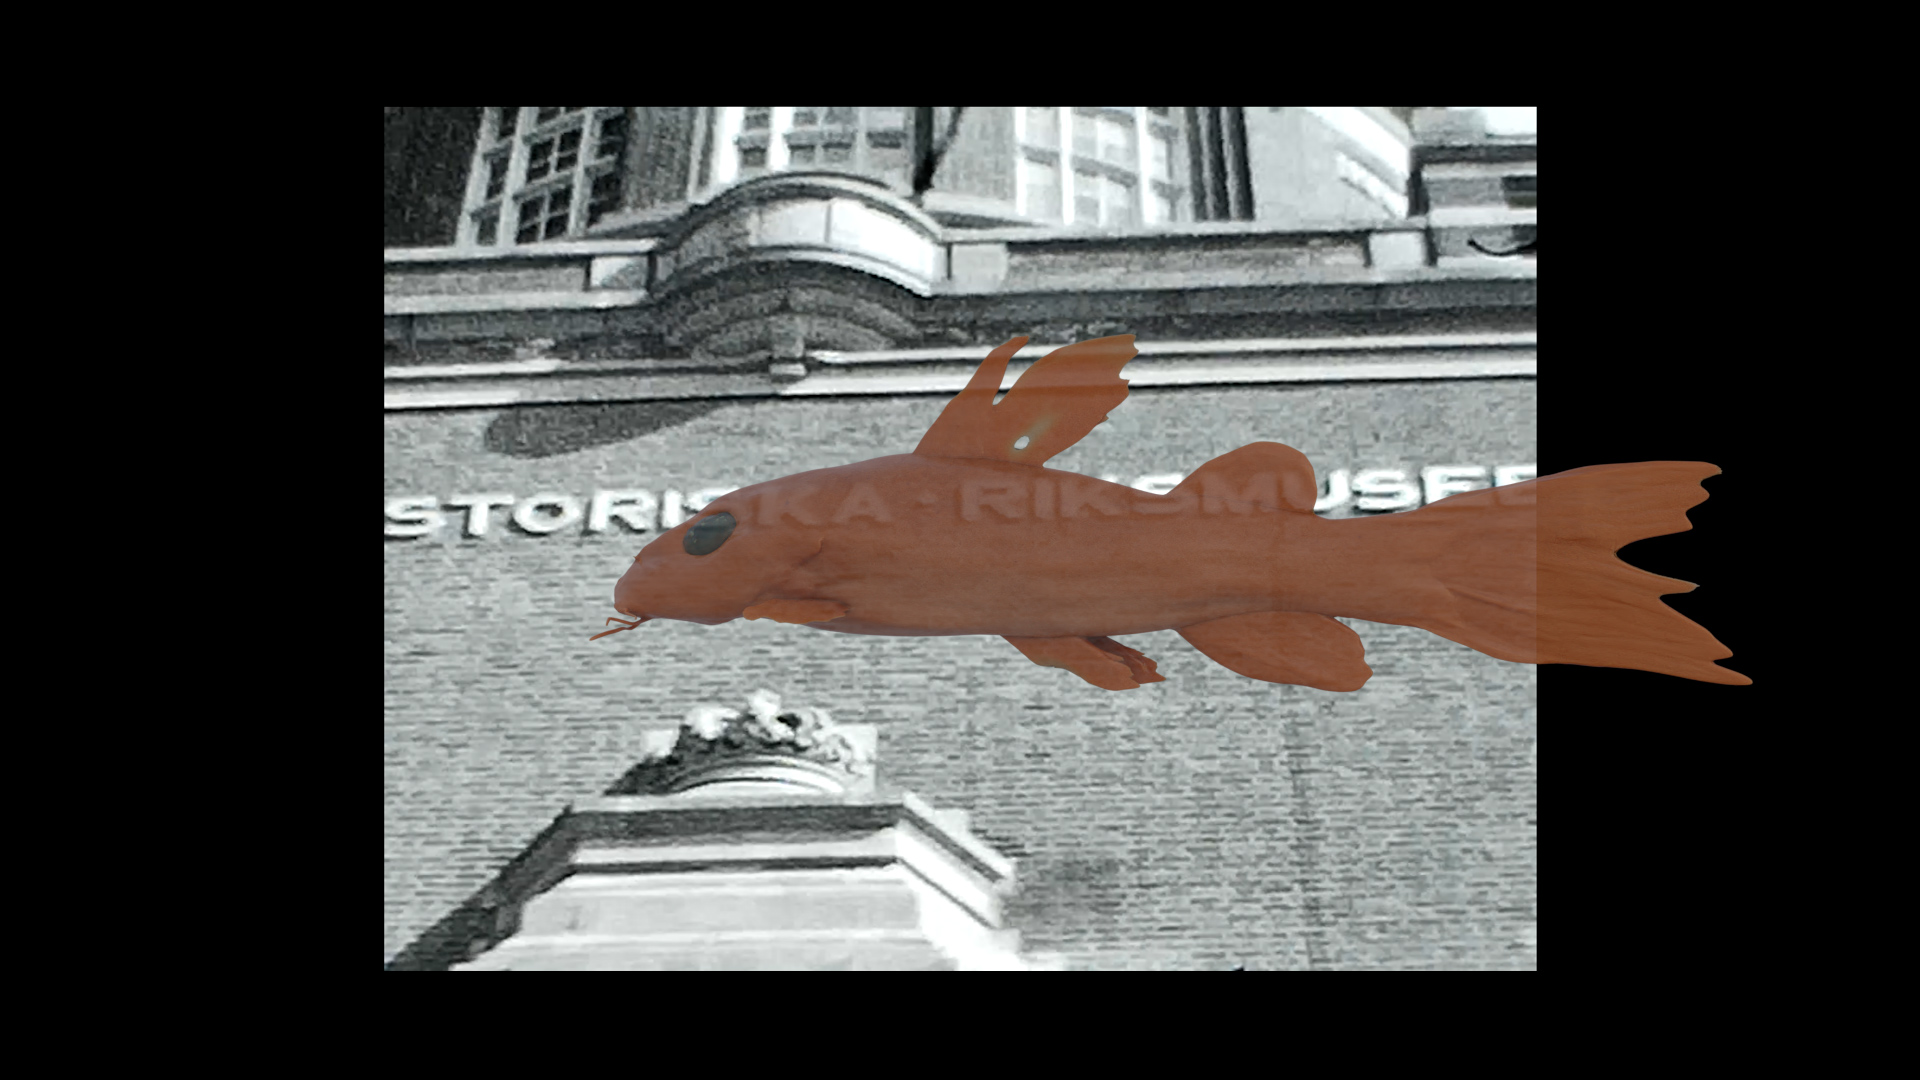 An image of a CGI fish swimming in front of a grainy found image of a building.